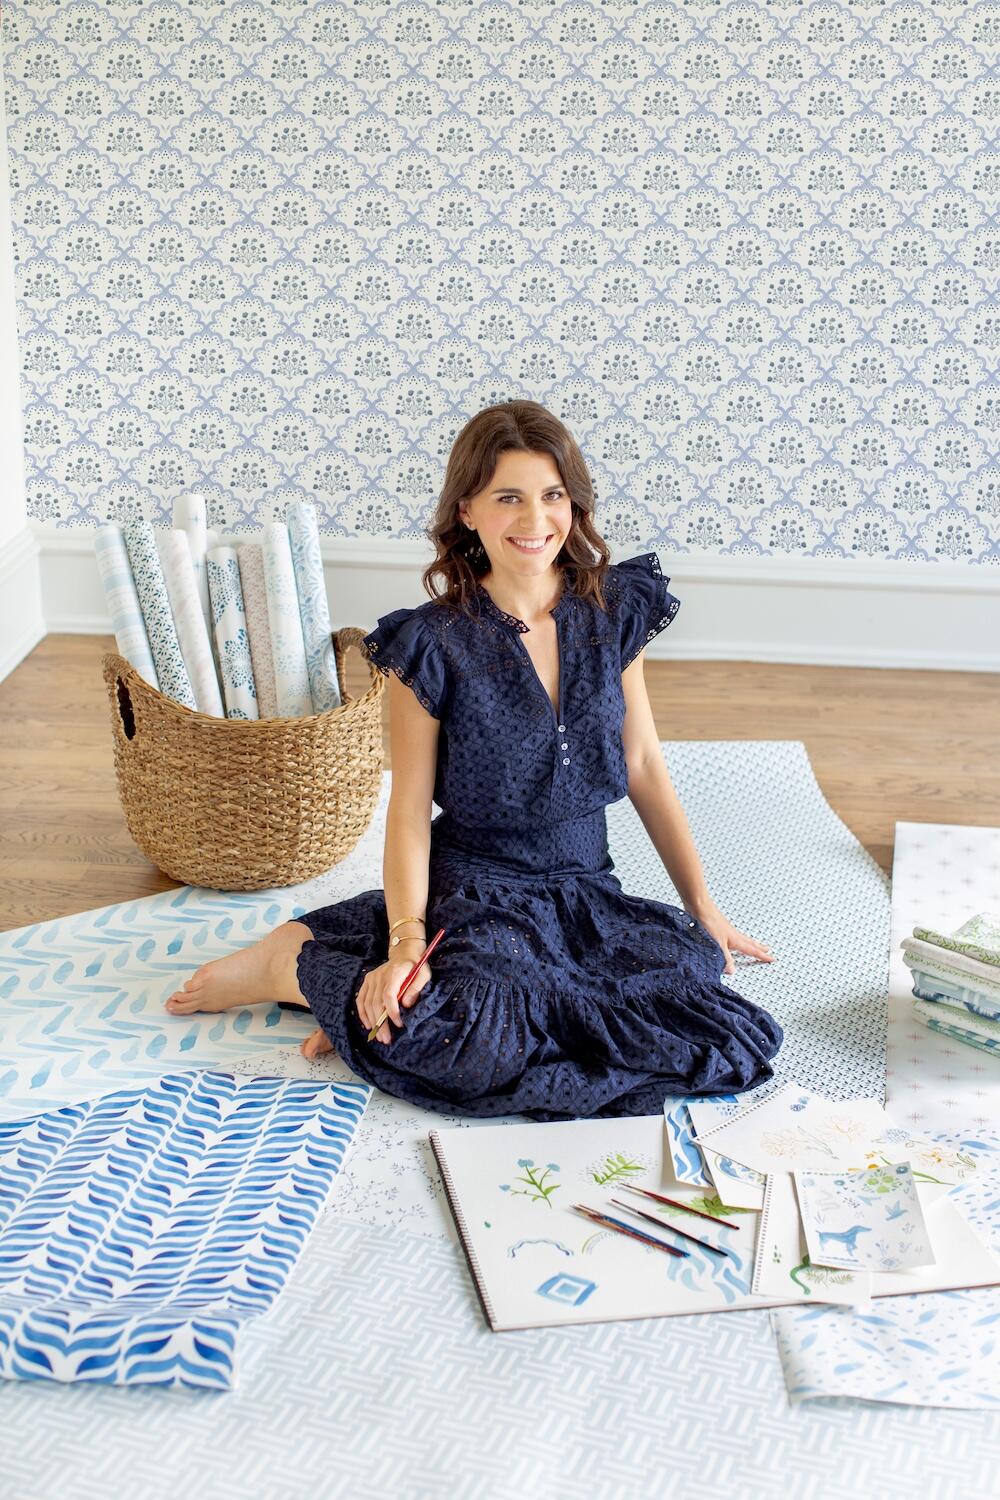 This self-taught textile designer’s brand was inspired by her pandemic-era pursuit of joy